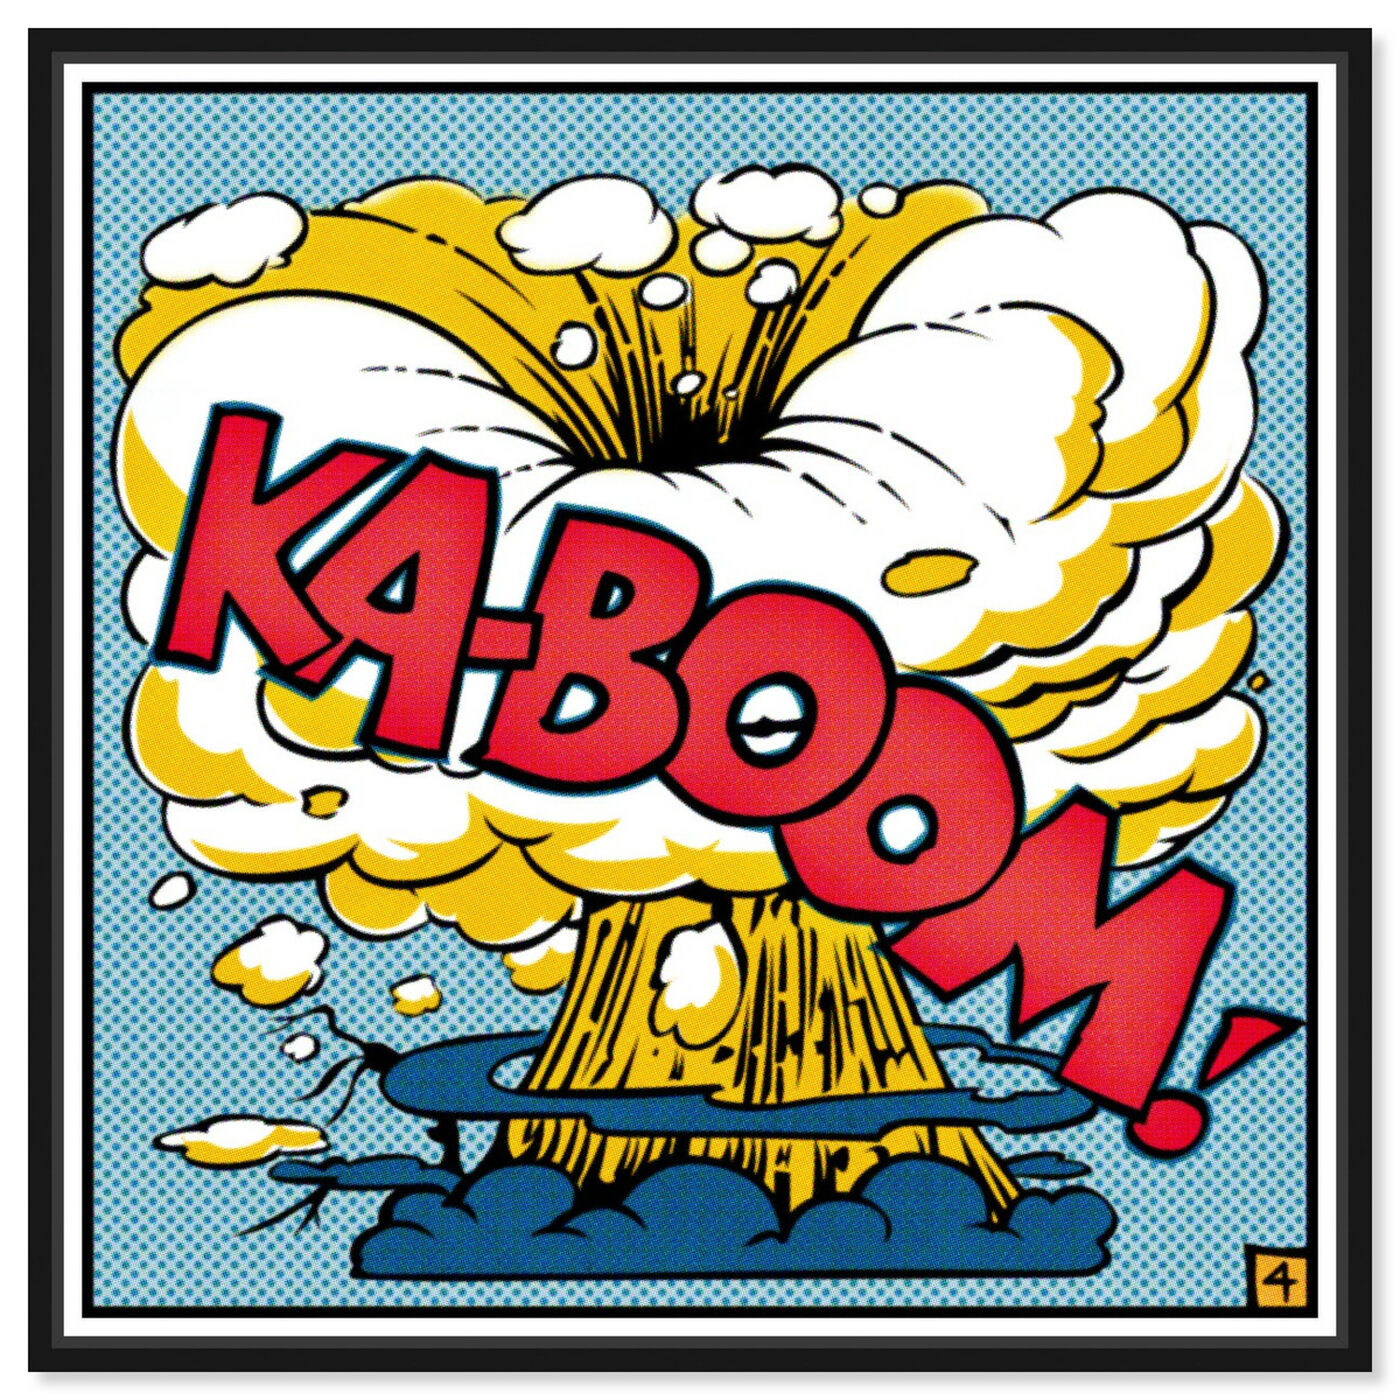 Front view of Ka-Boom featuring advertising and comics art.